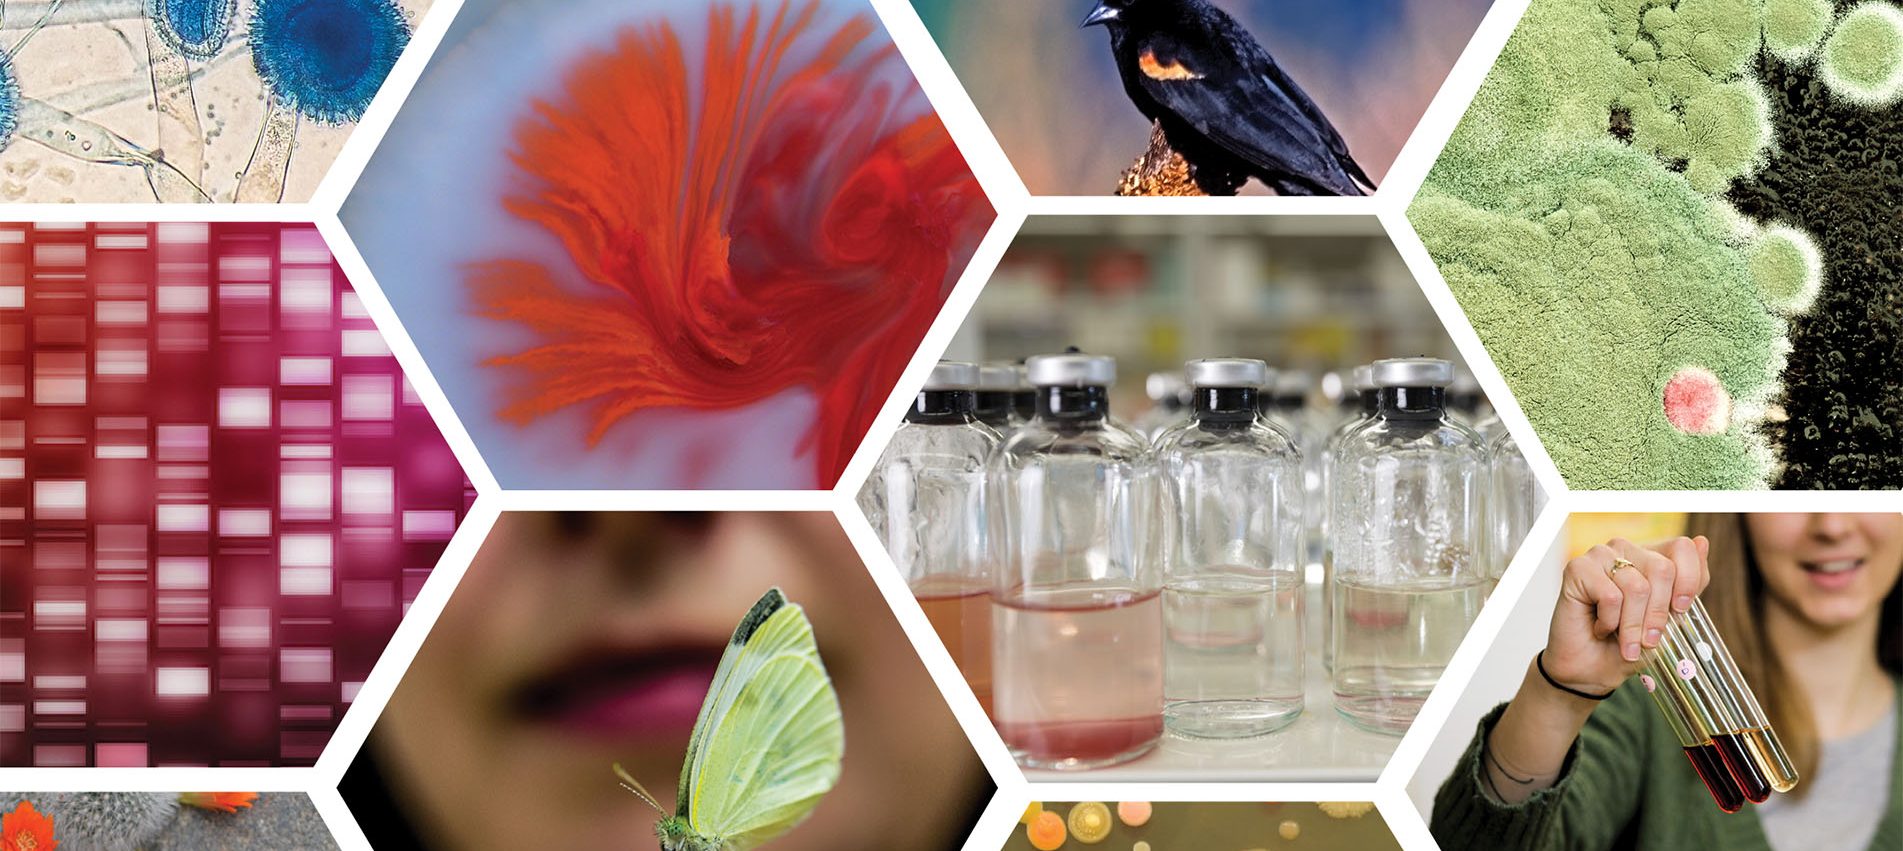 A collage of nature graphics: a butterfly, flowering cactus, fish, microbes in a petri dish